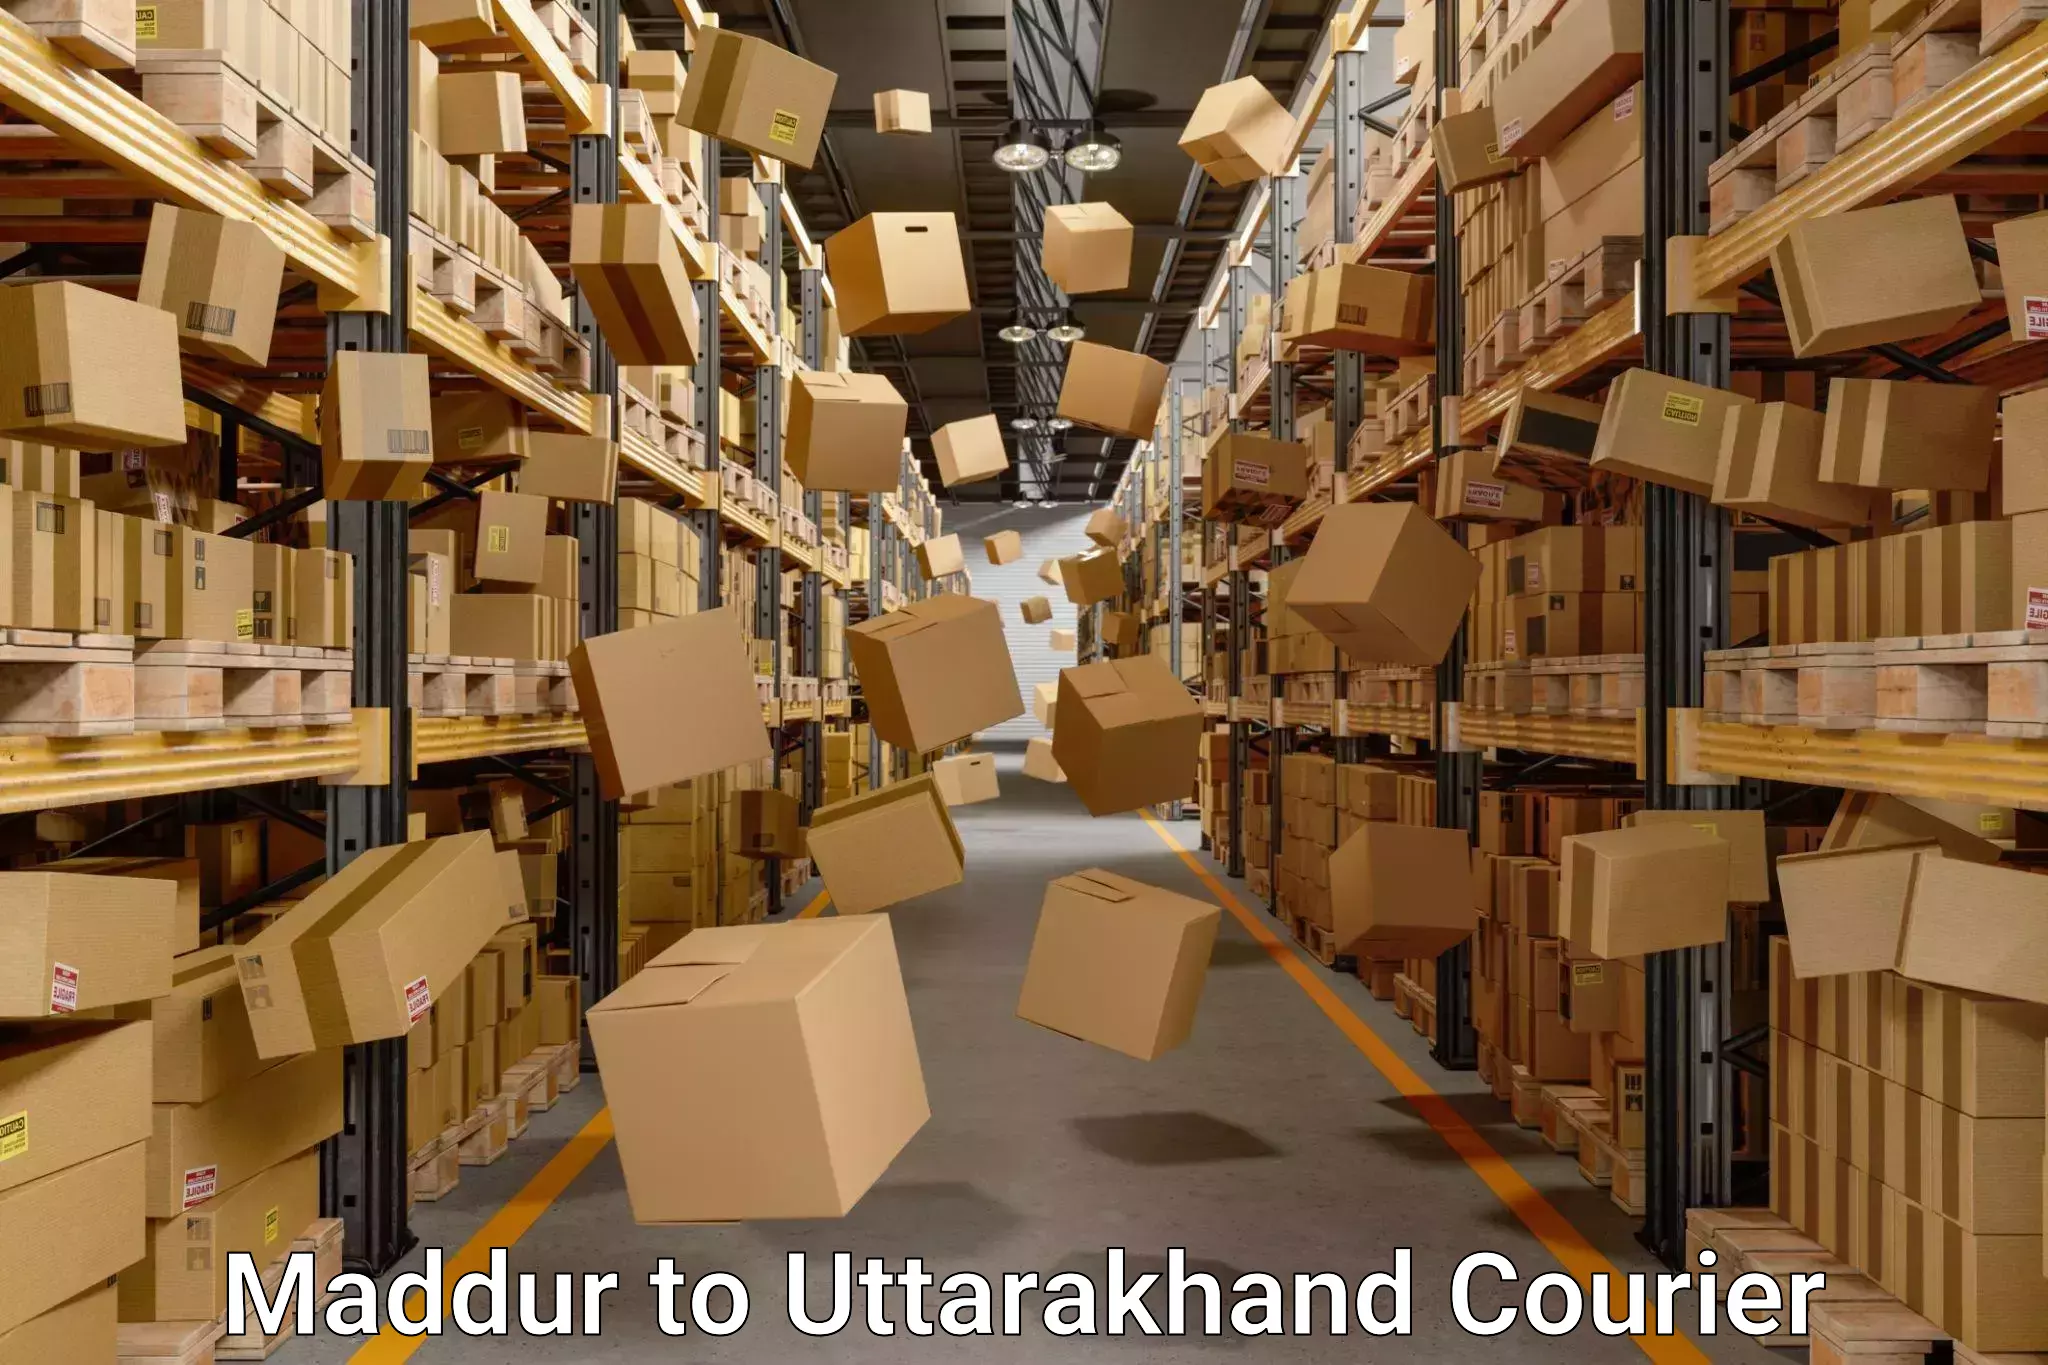 Trusted relocation services Maddur to Uttarakhand